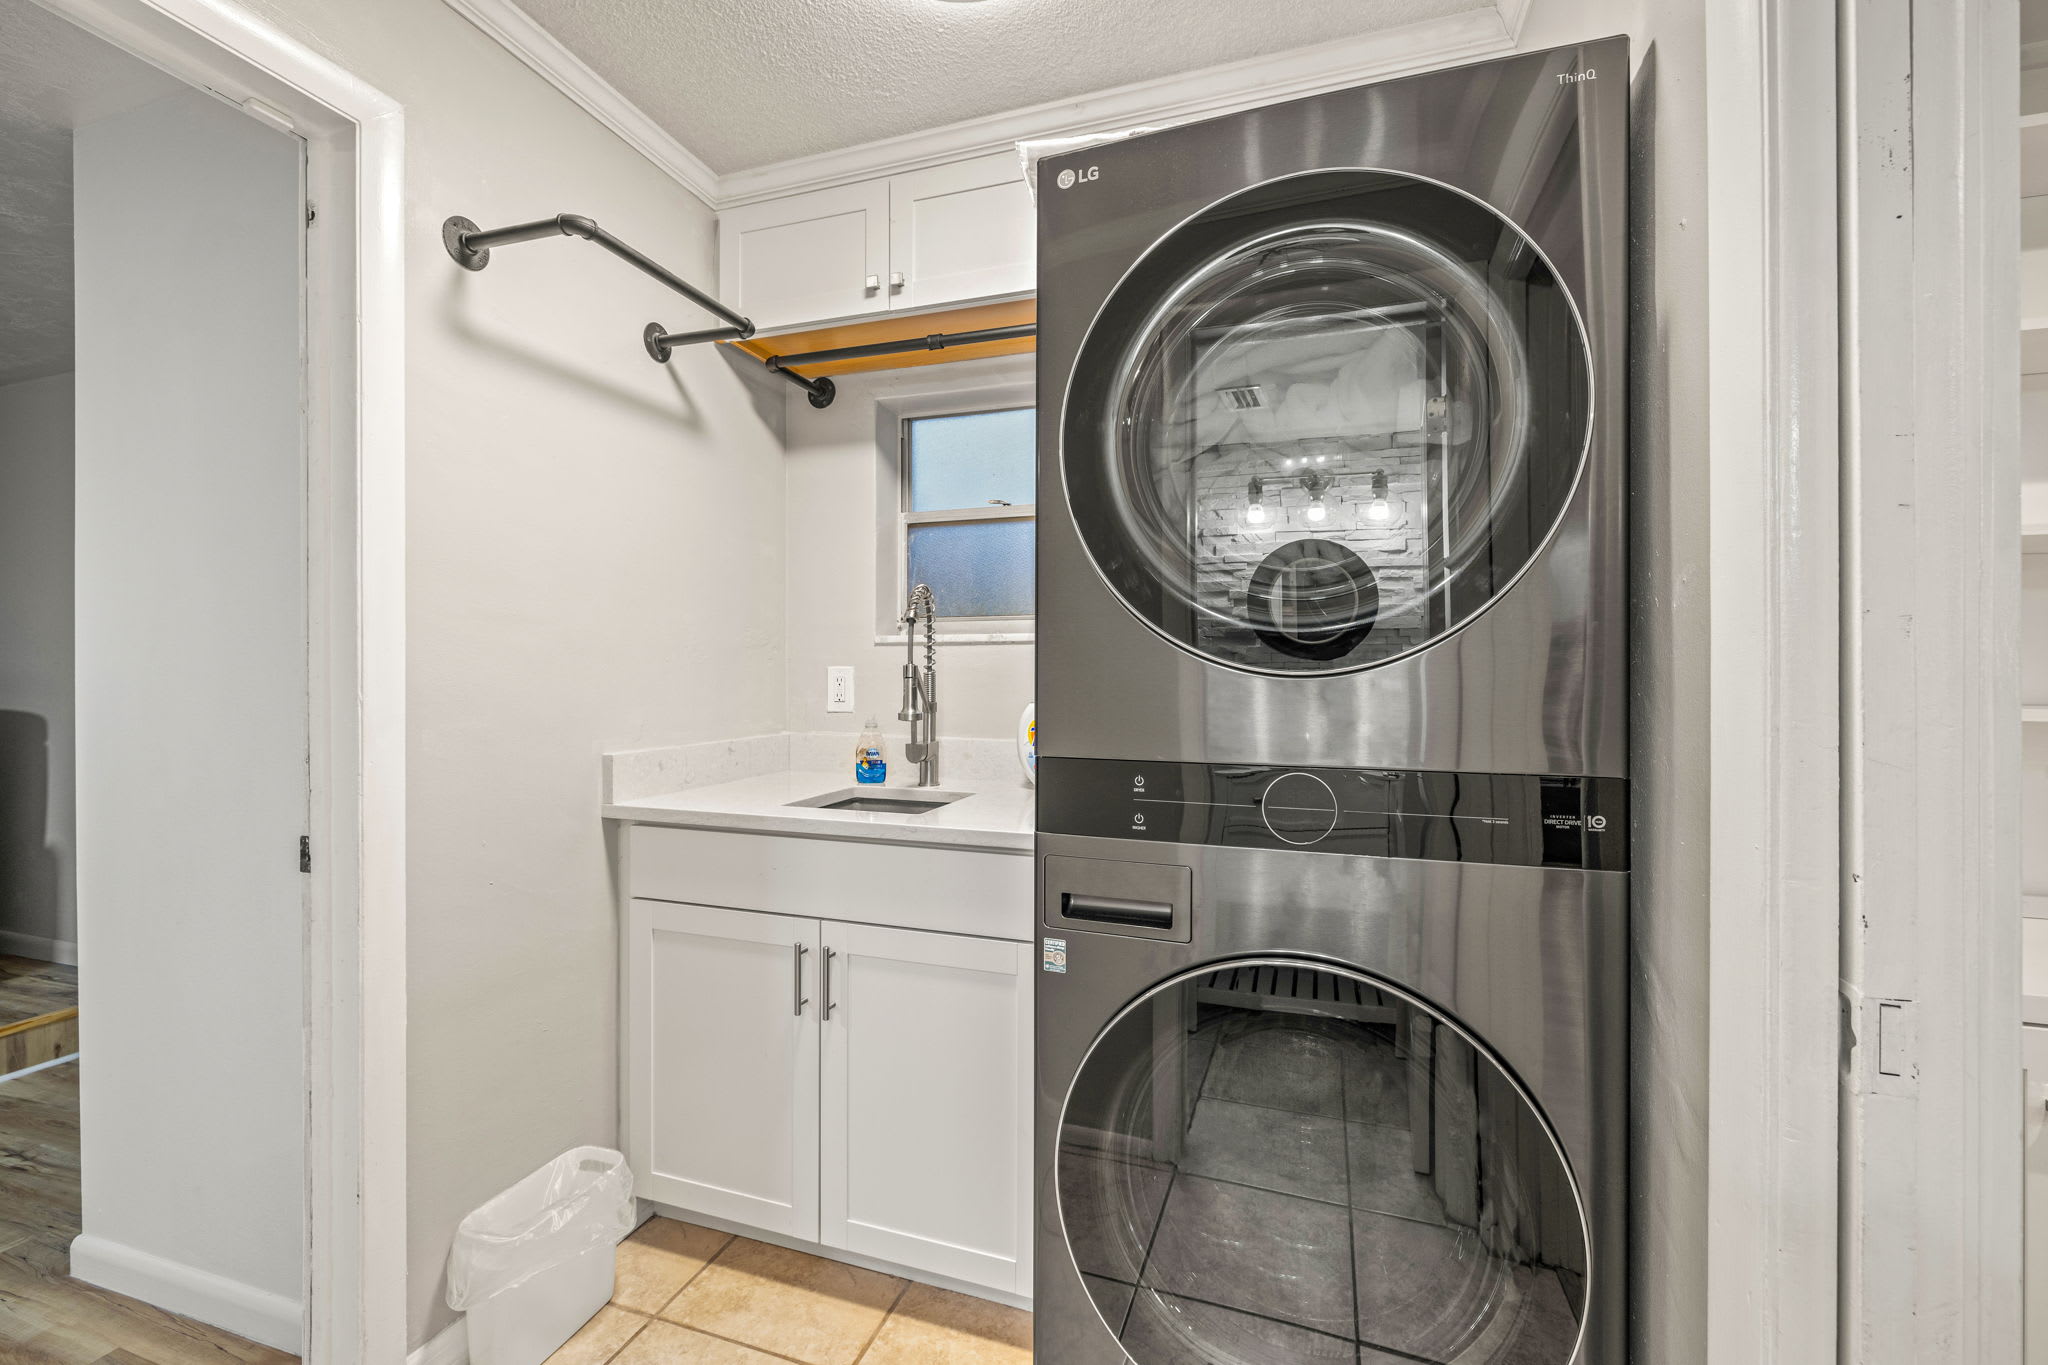 Full laundry room with washer and dryer